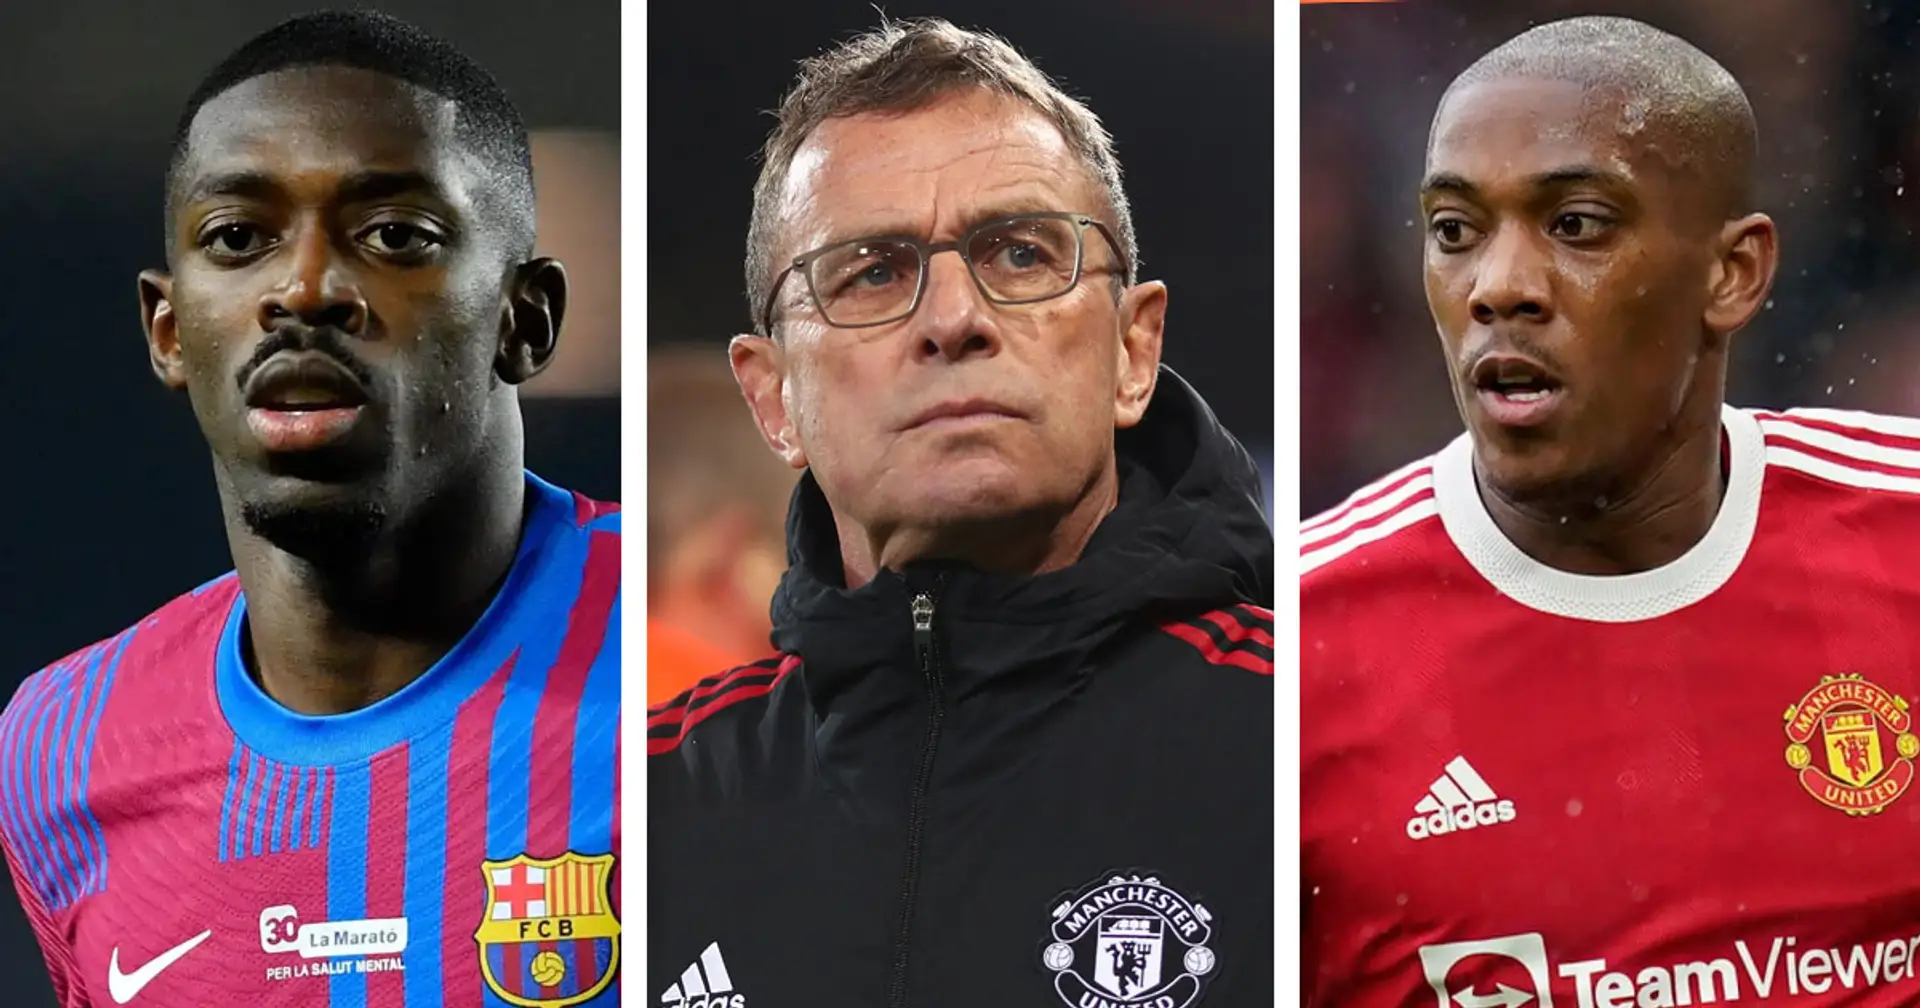 Ousmane Dembele, Julian Alvarez and 10 more names in Man United's latest transfer round-up